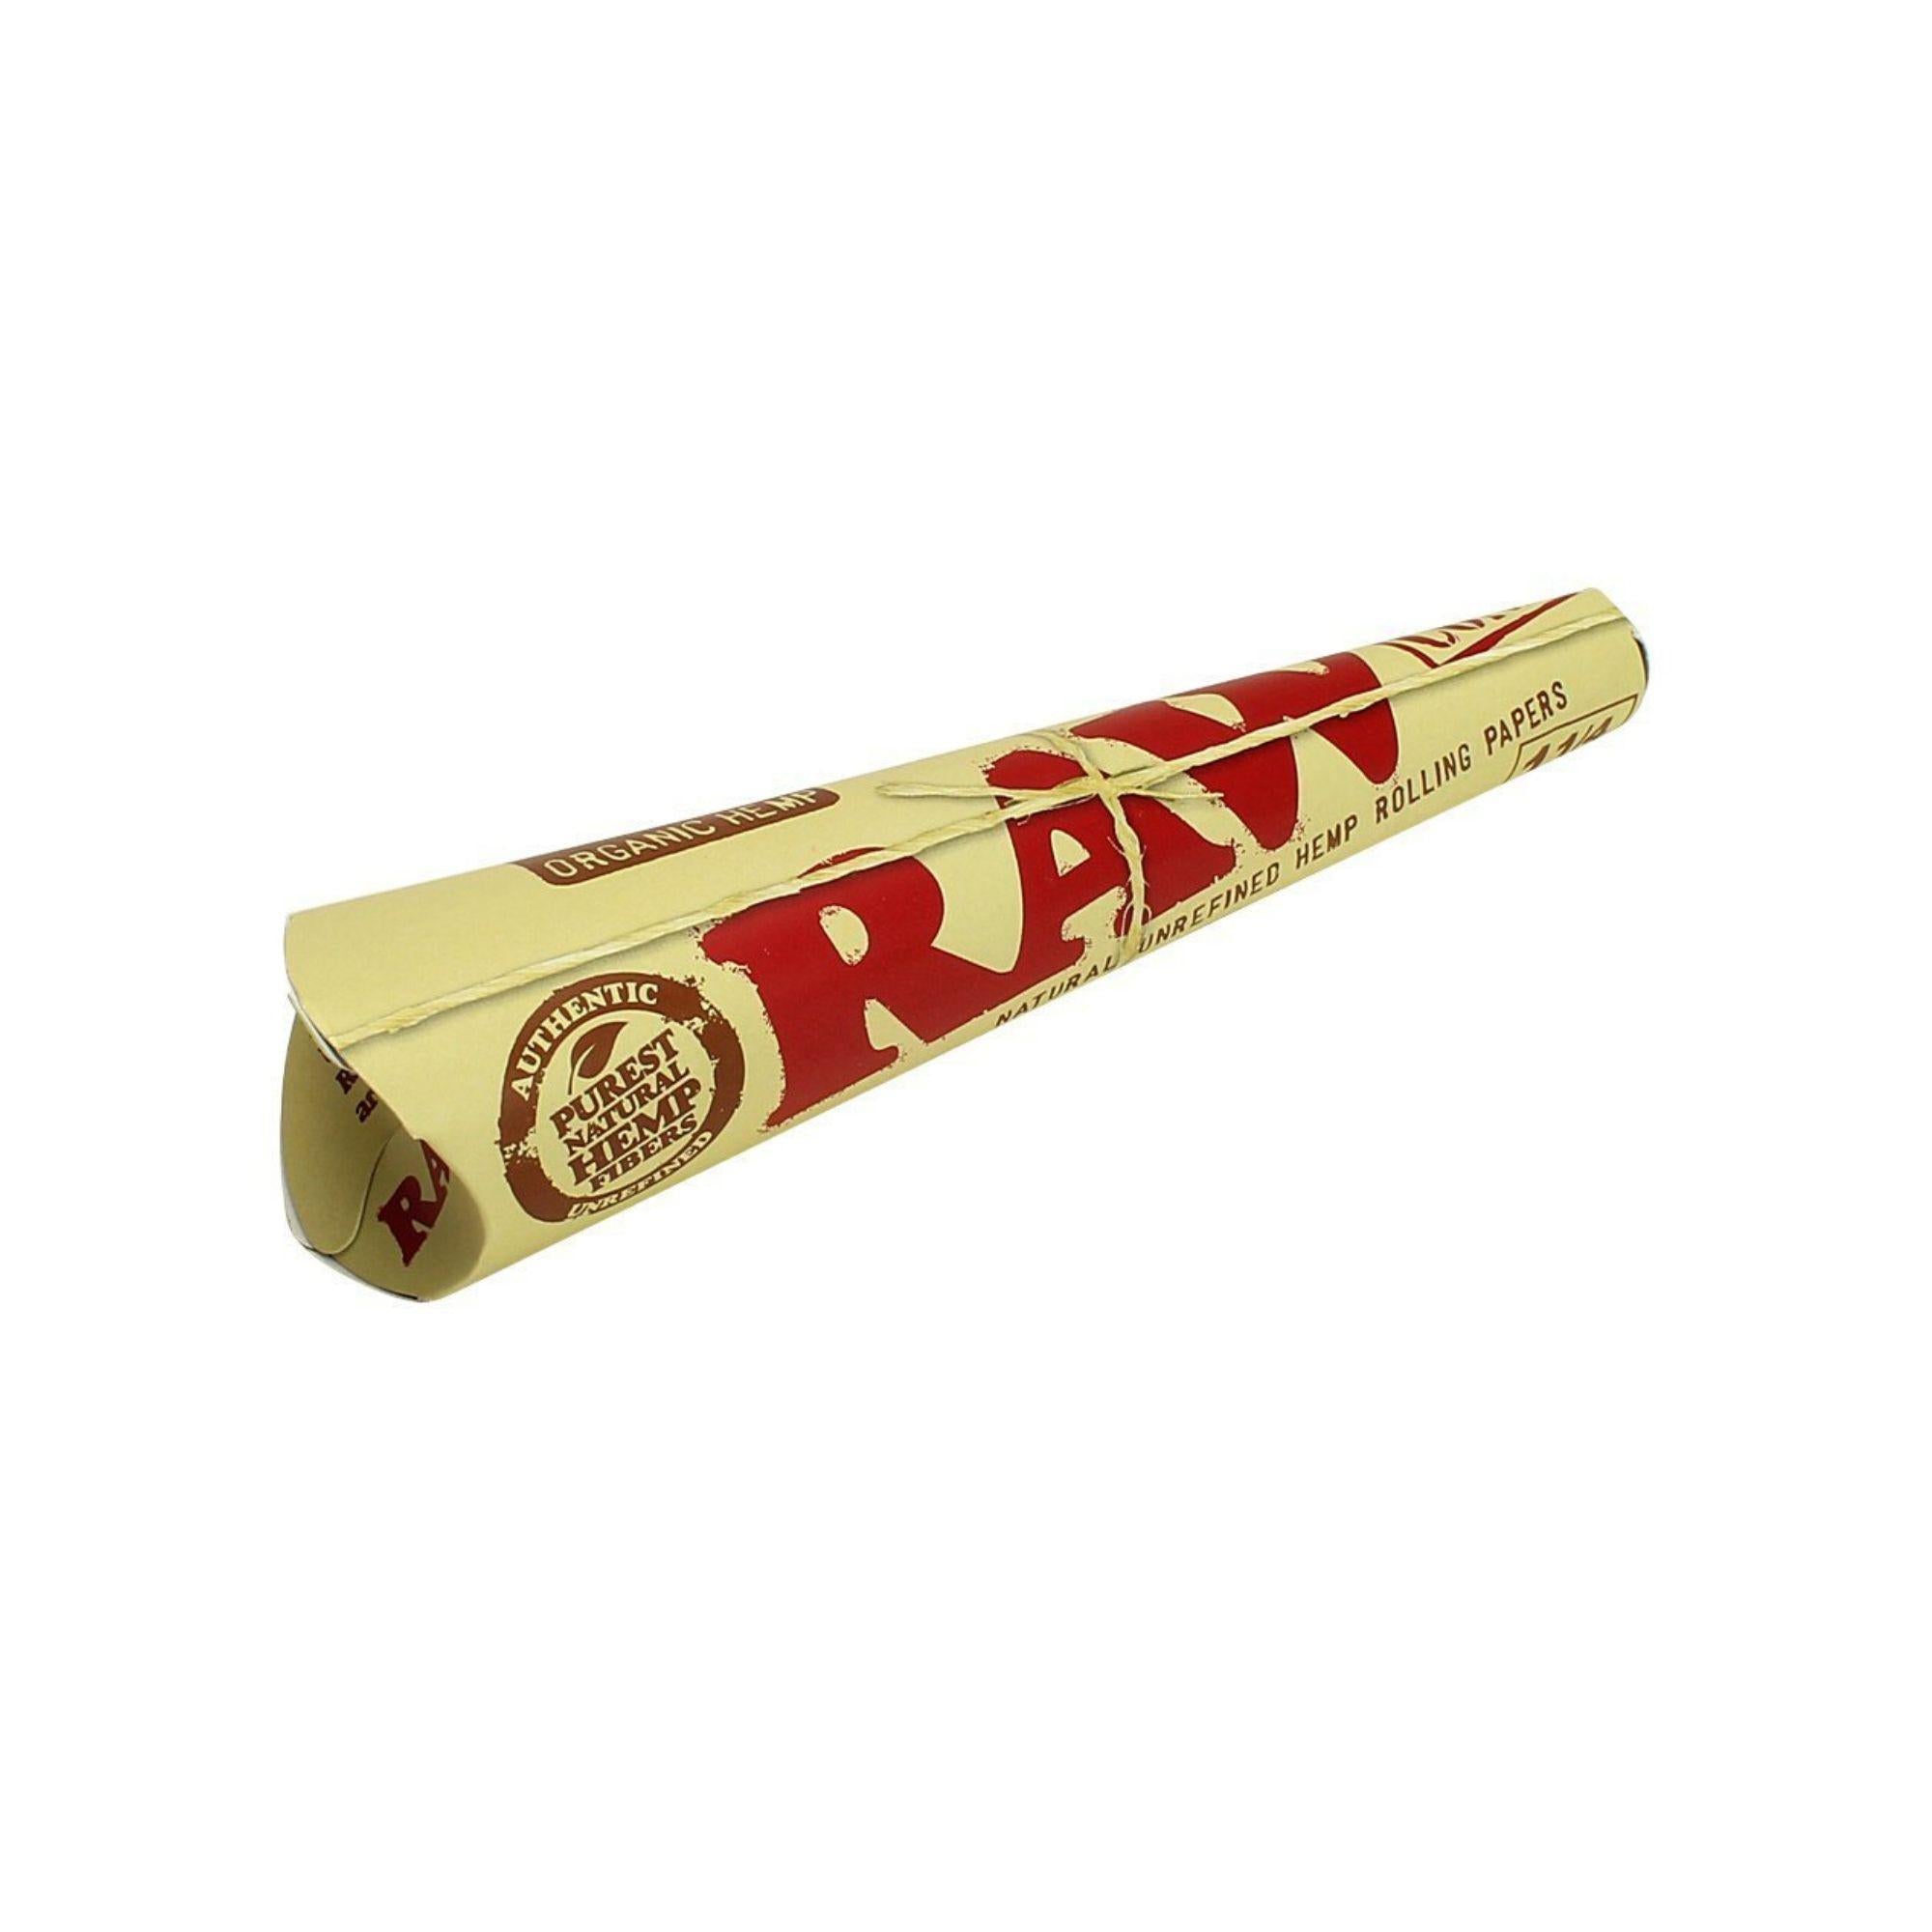 RAW Organic 1 1/4 Pre-Rolled Cones 1 Pack